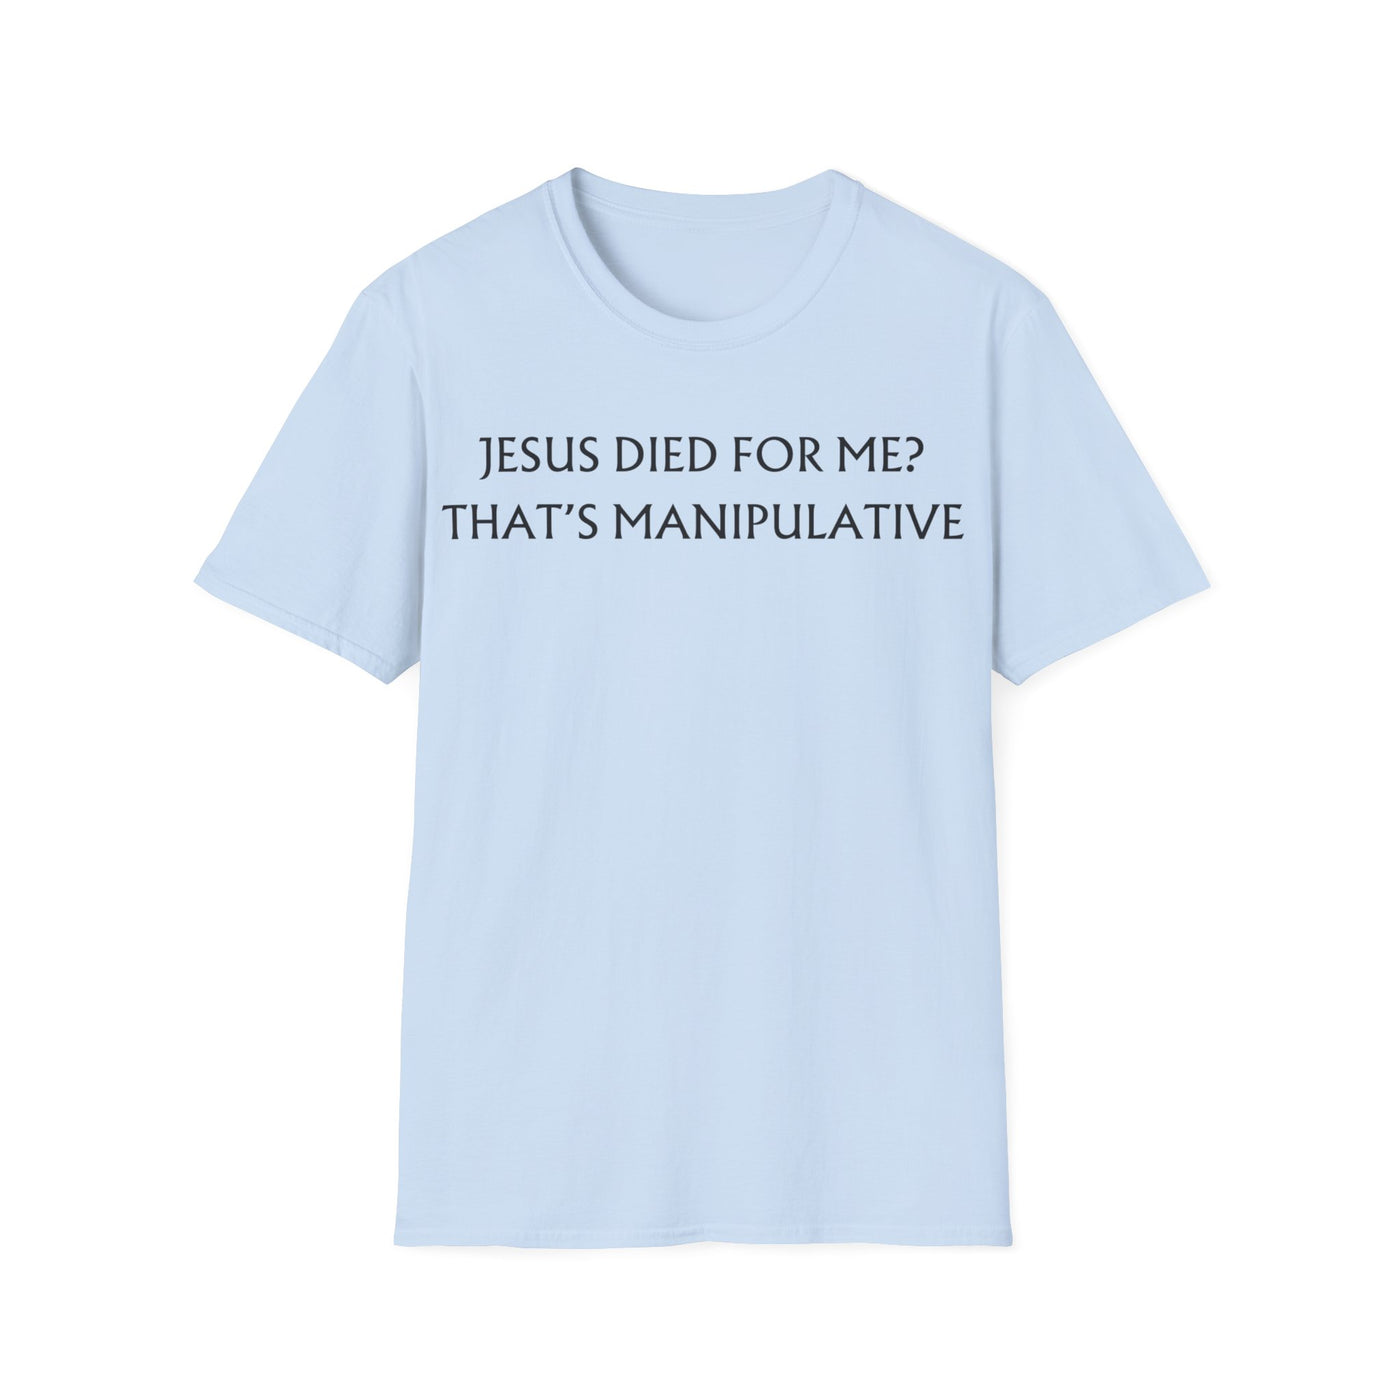 Jesus Died For Me? That's Manipulative